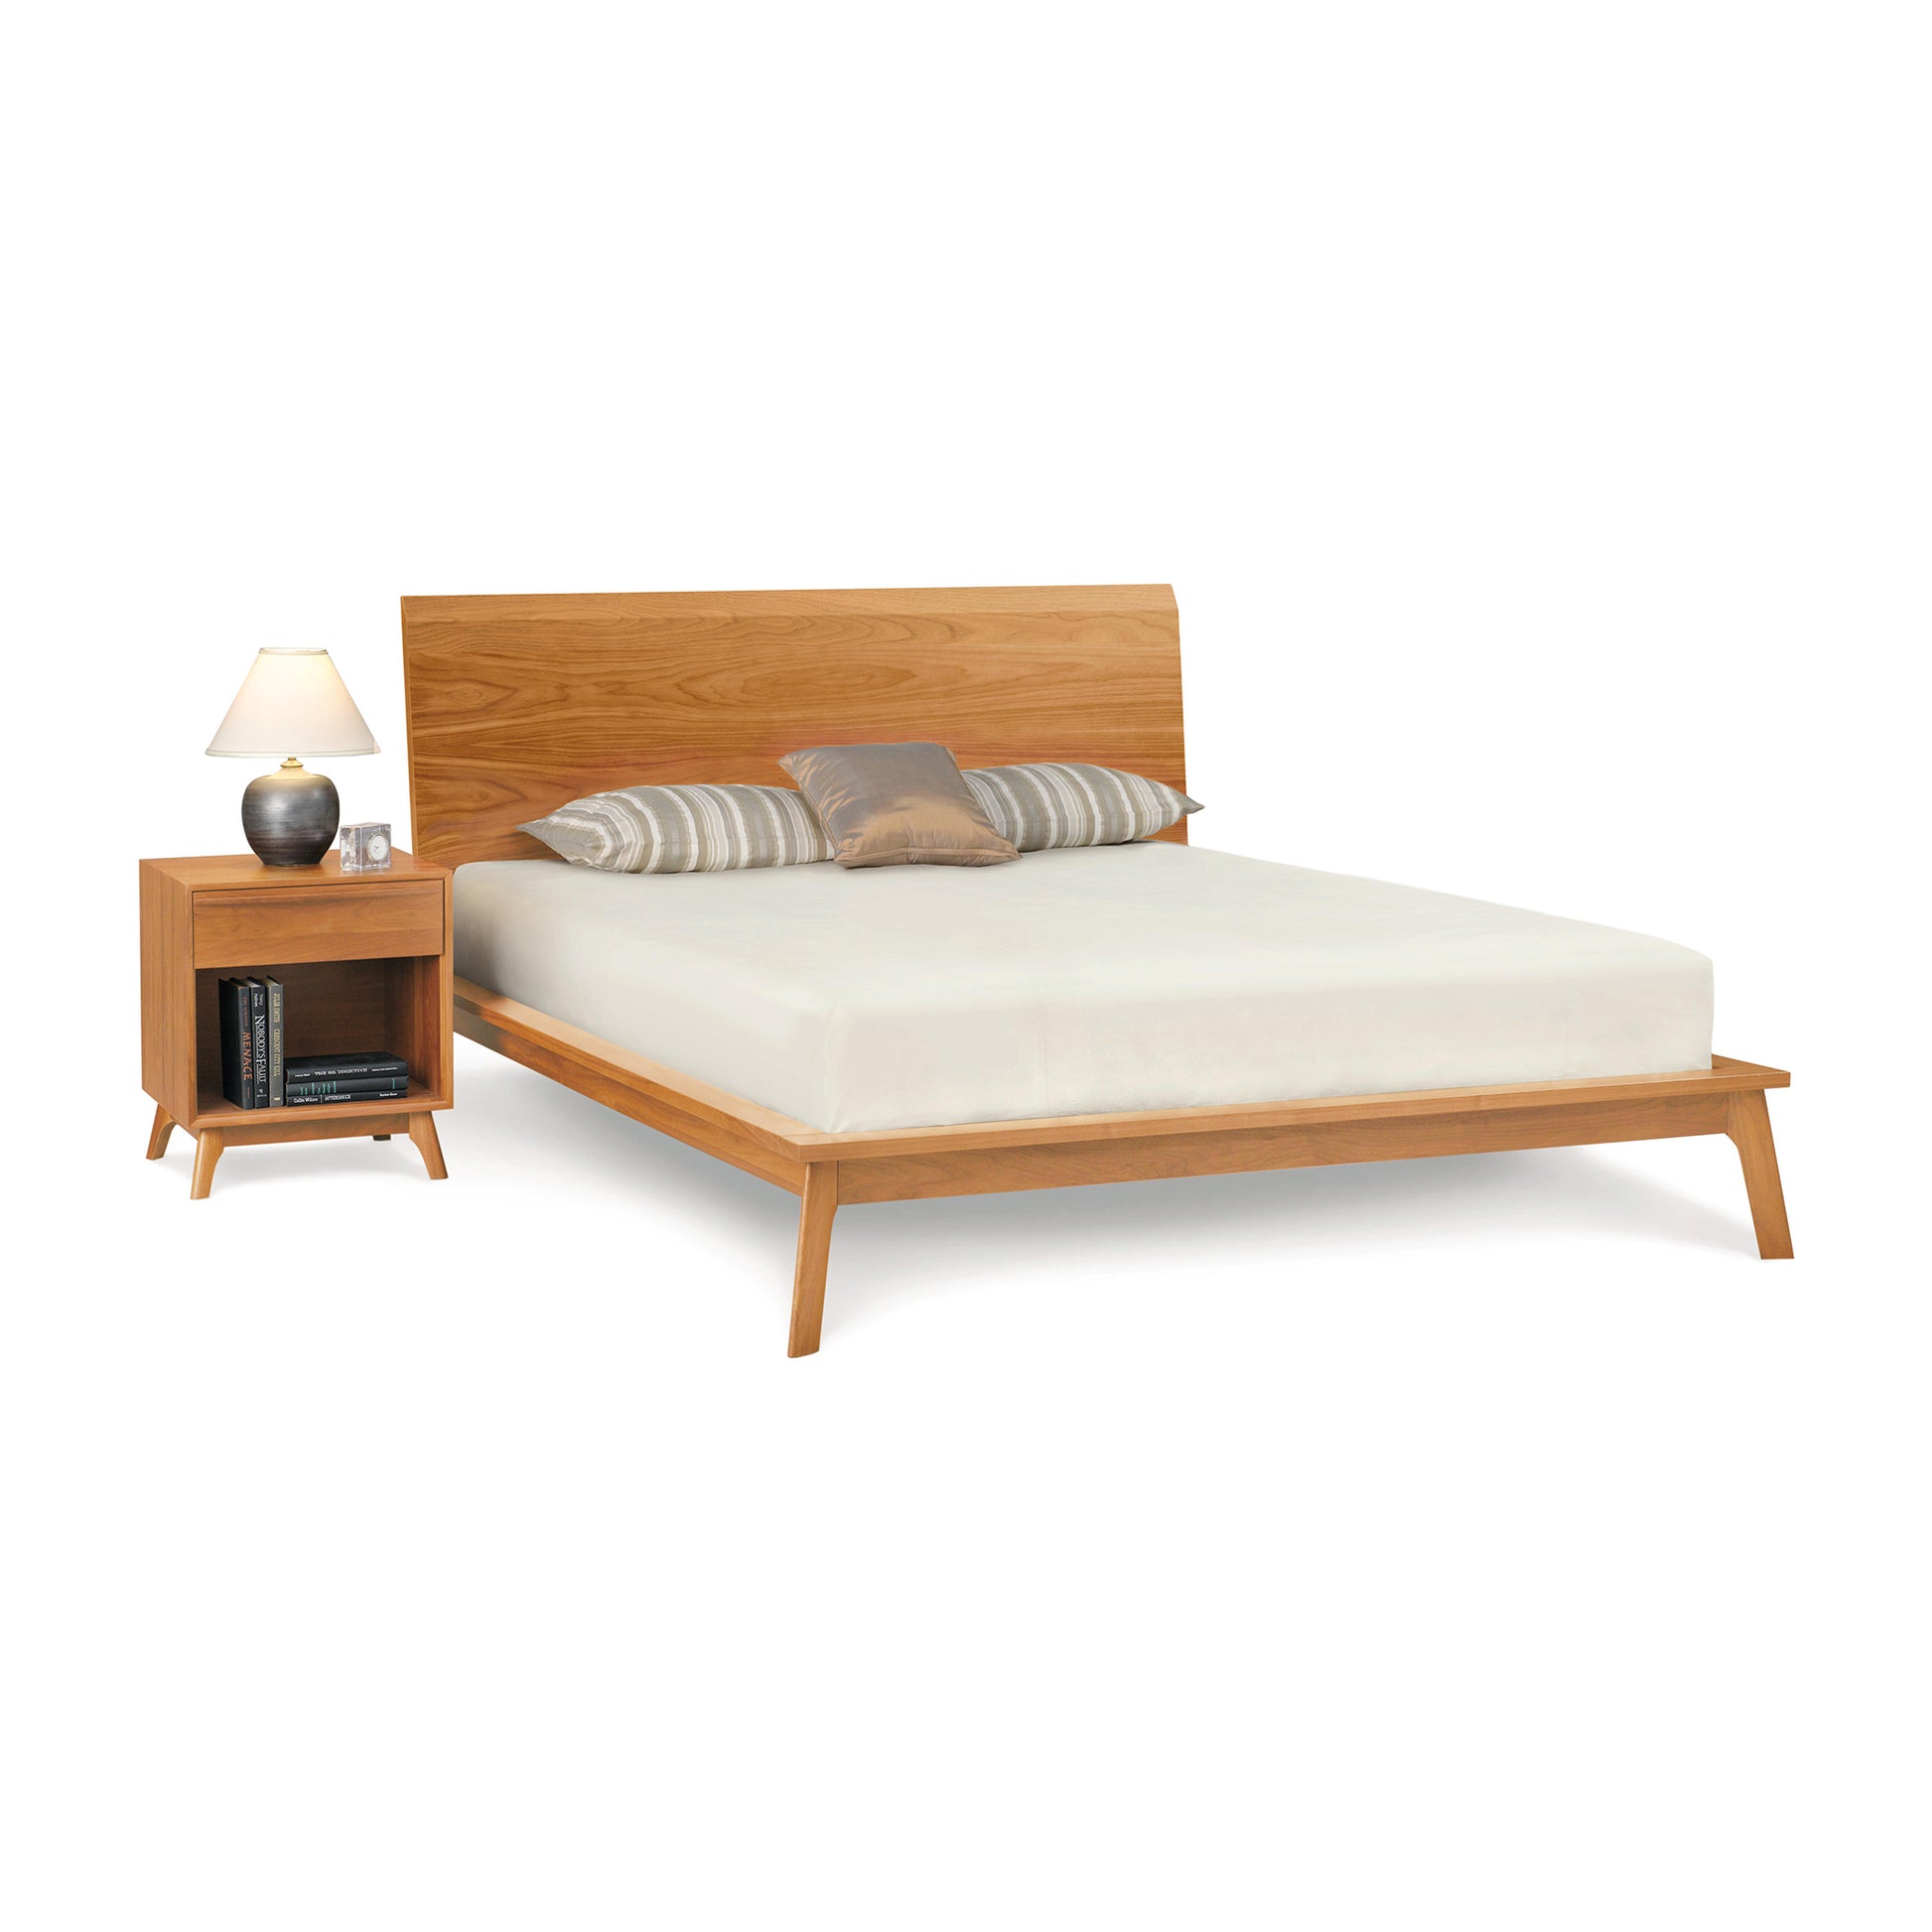 A modern Copeland Furniture Catalina Cherry Platform Bed frame made of solid natural cherry hardwood, with a matching nightstand and a neutral-colored bedding set.